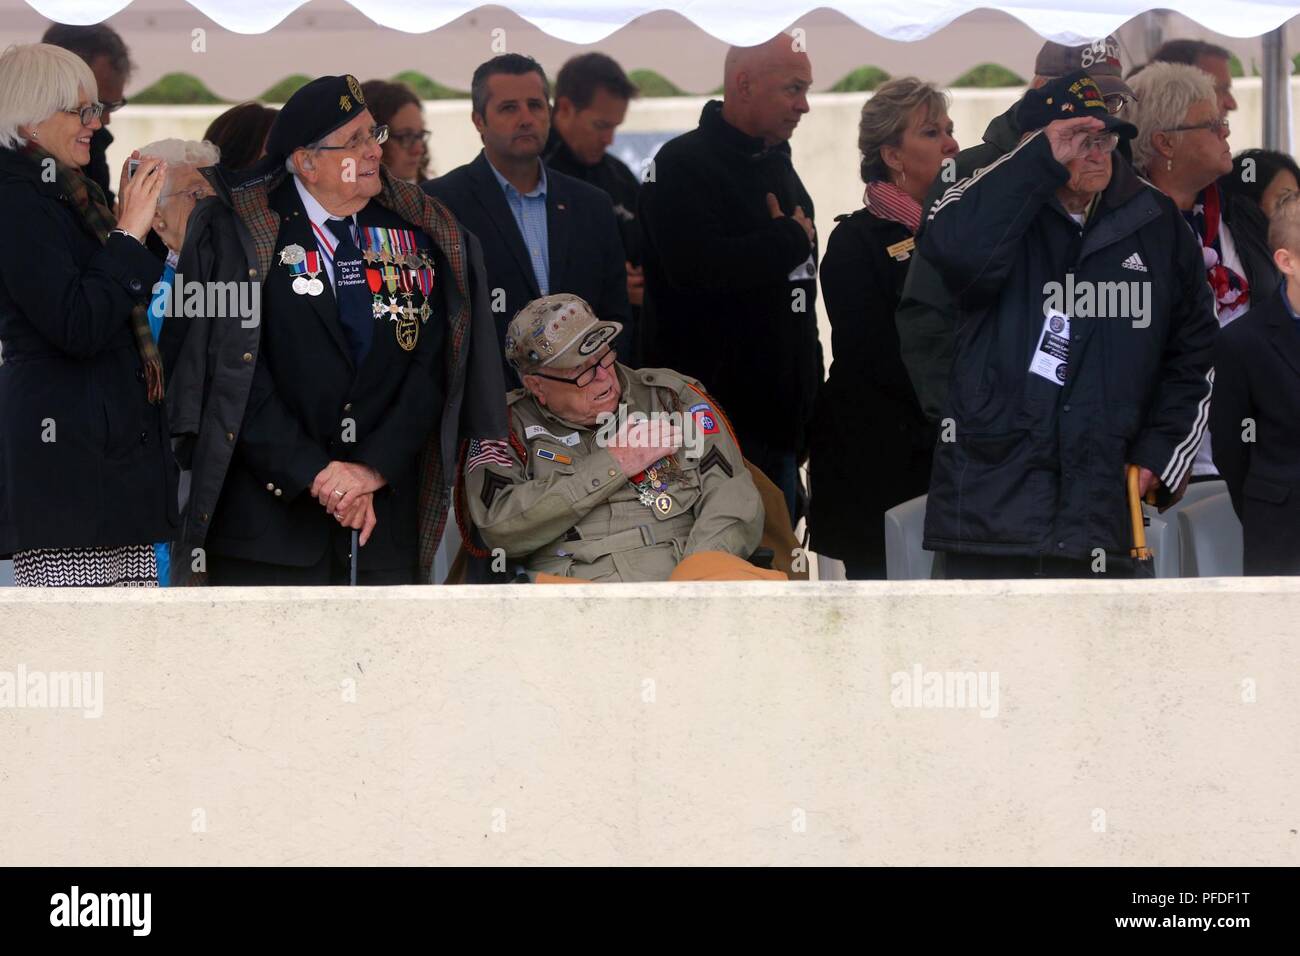 WWII veteran, George Shankle (center), a radio operator with Co. E., 508th Parachute Infantry Regiment, 1st Brigade Combat Team, 82nd Airborne Division, places his hand over his heart as wreaths are laid at the base of a monument during the 74th D-Day commemoration ceremony June 6, 2018 at Utah Beach along the coast of France. Seventy-four years ago to the day, paratroopers, Soldiers, Sailors and Airmen of the United States military conducted the largest assault and changed the tide of WWII. Stock Photo